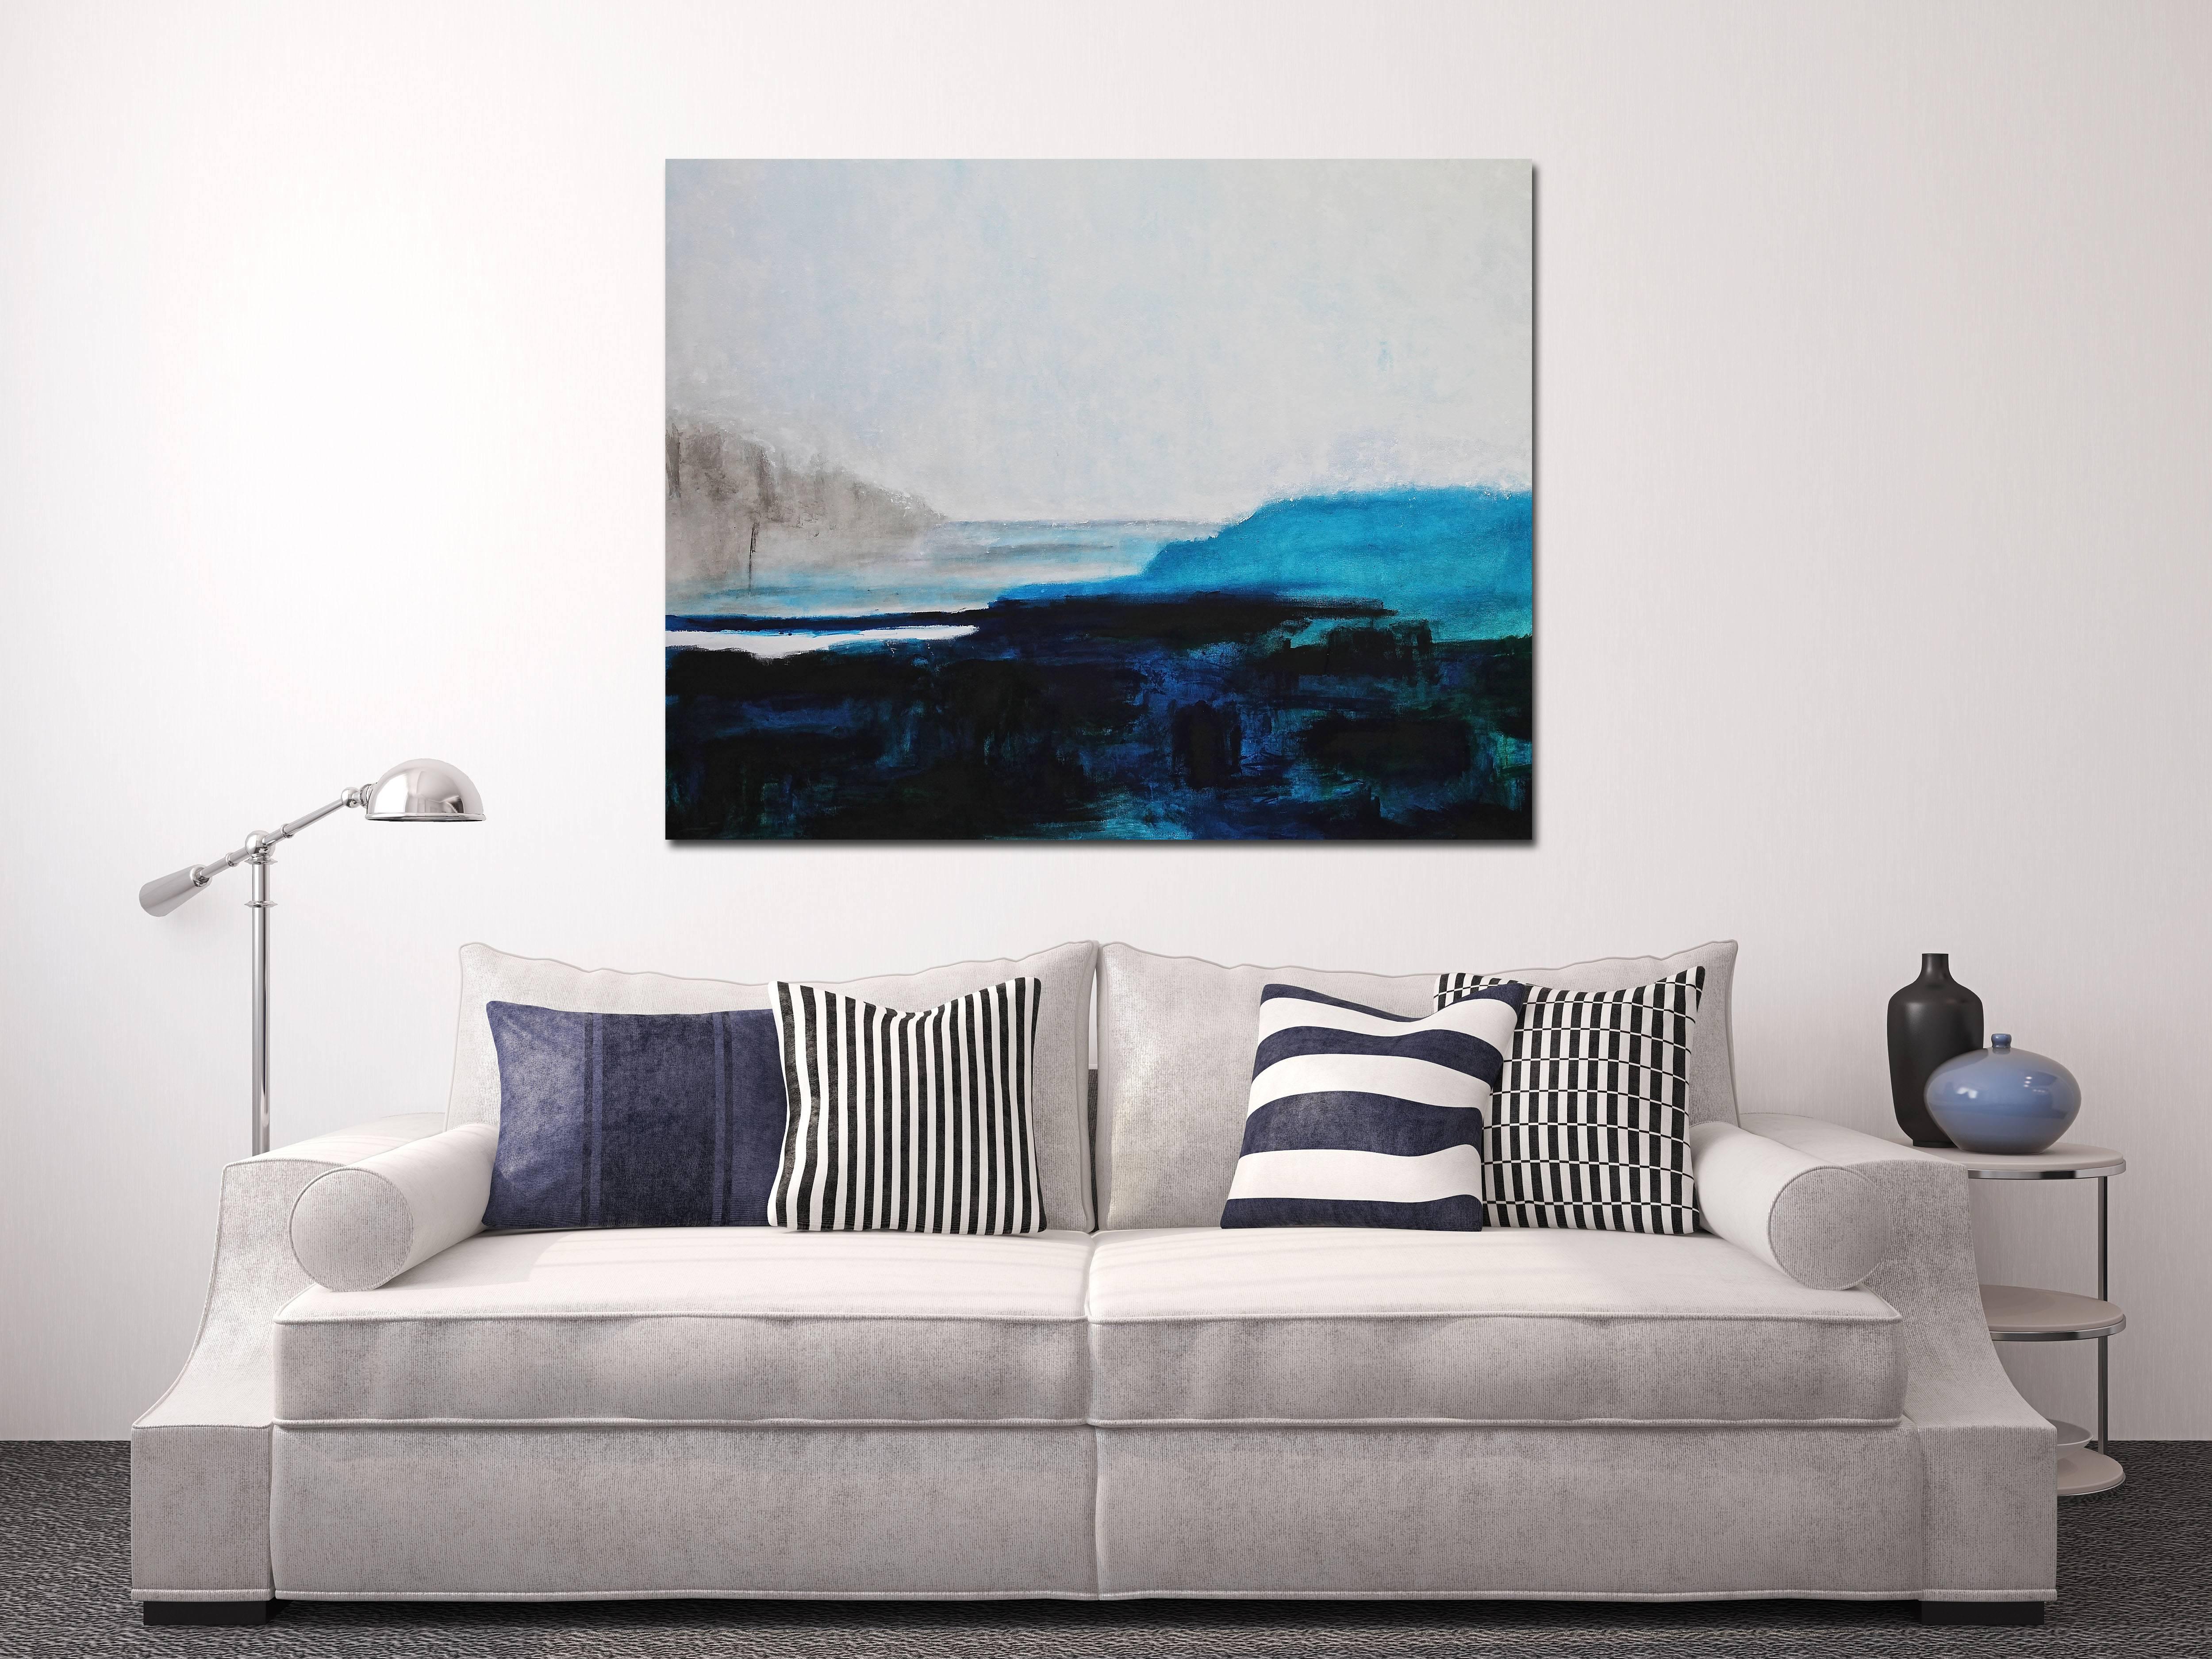 Hawaiian Vacation - Blue Landscape Painting by Amber Goldhammer